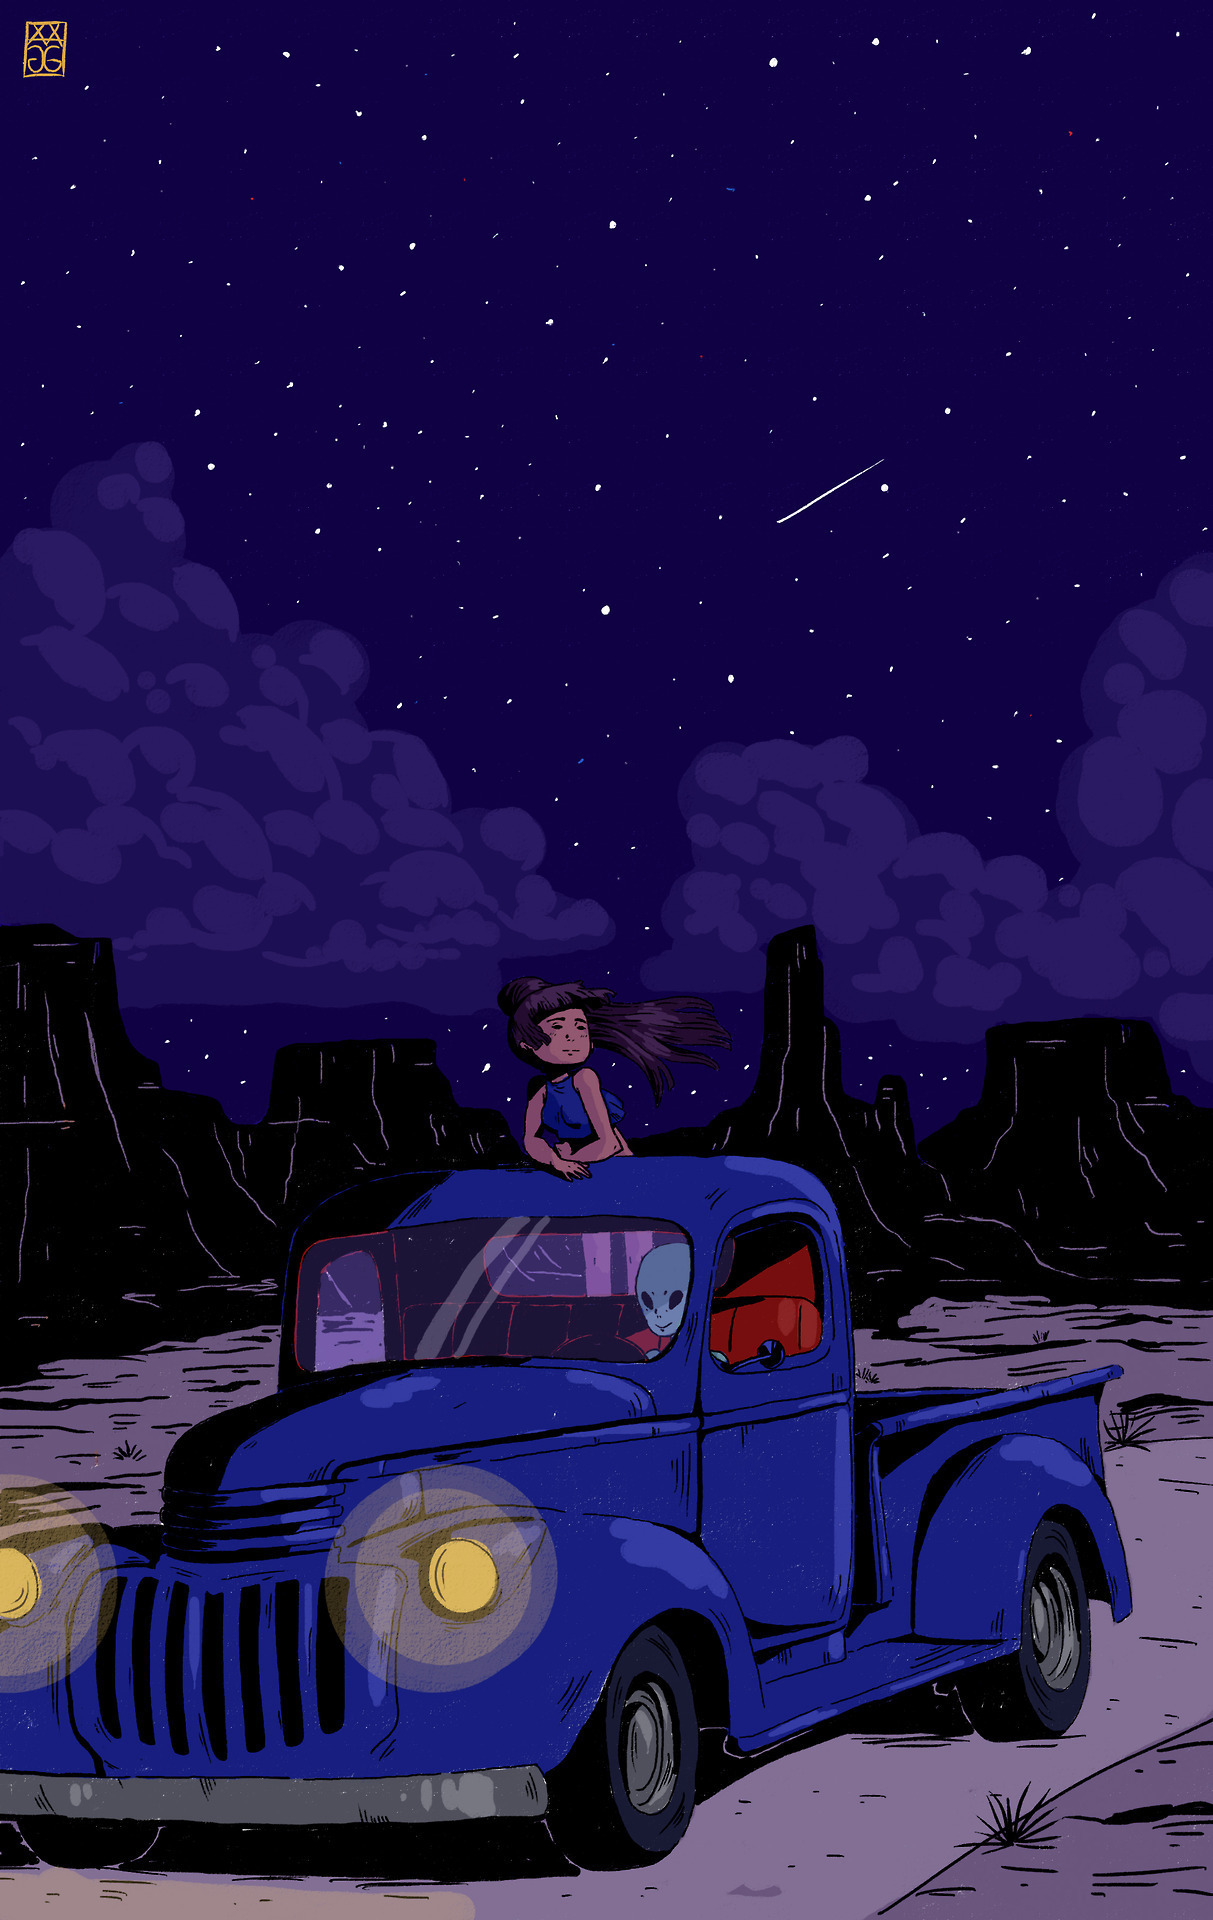 This is an illustration I made for a personal art project called the desert Title: do you wanna leave the world with me? Oddinthecovenart.tumblr.com — Immediately post your art to a topic and get feedback. Join our new community, EatSleepDraw Studio,...